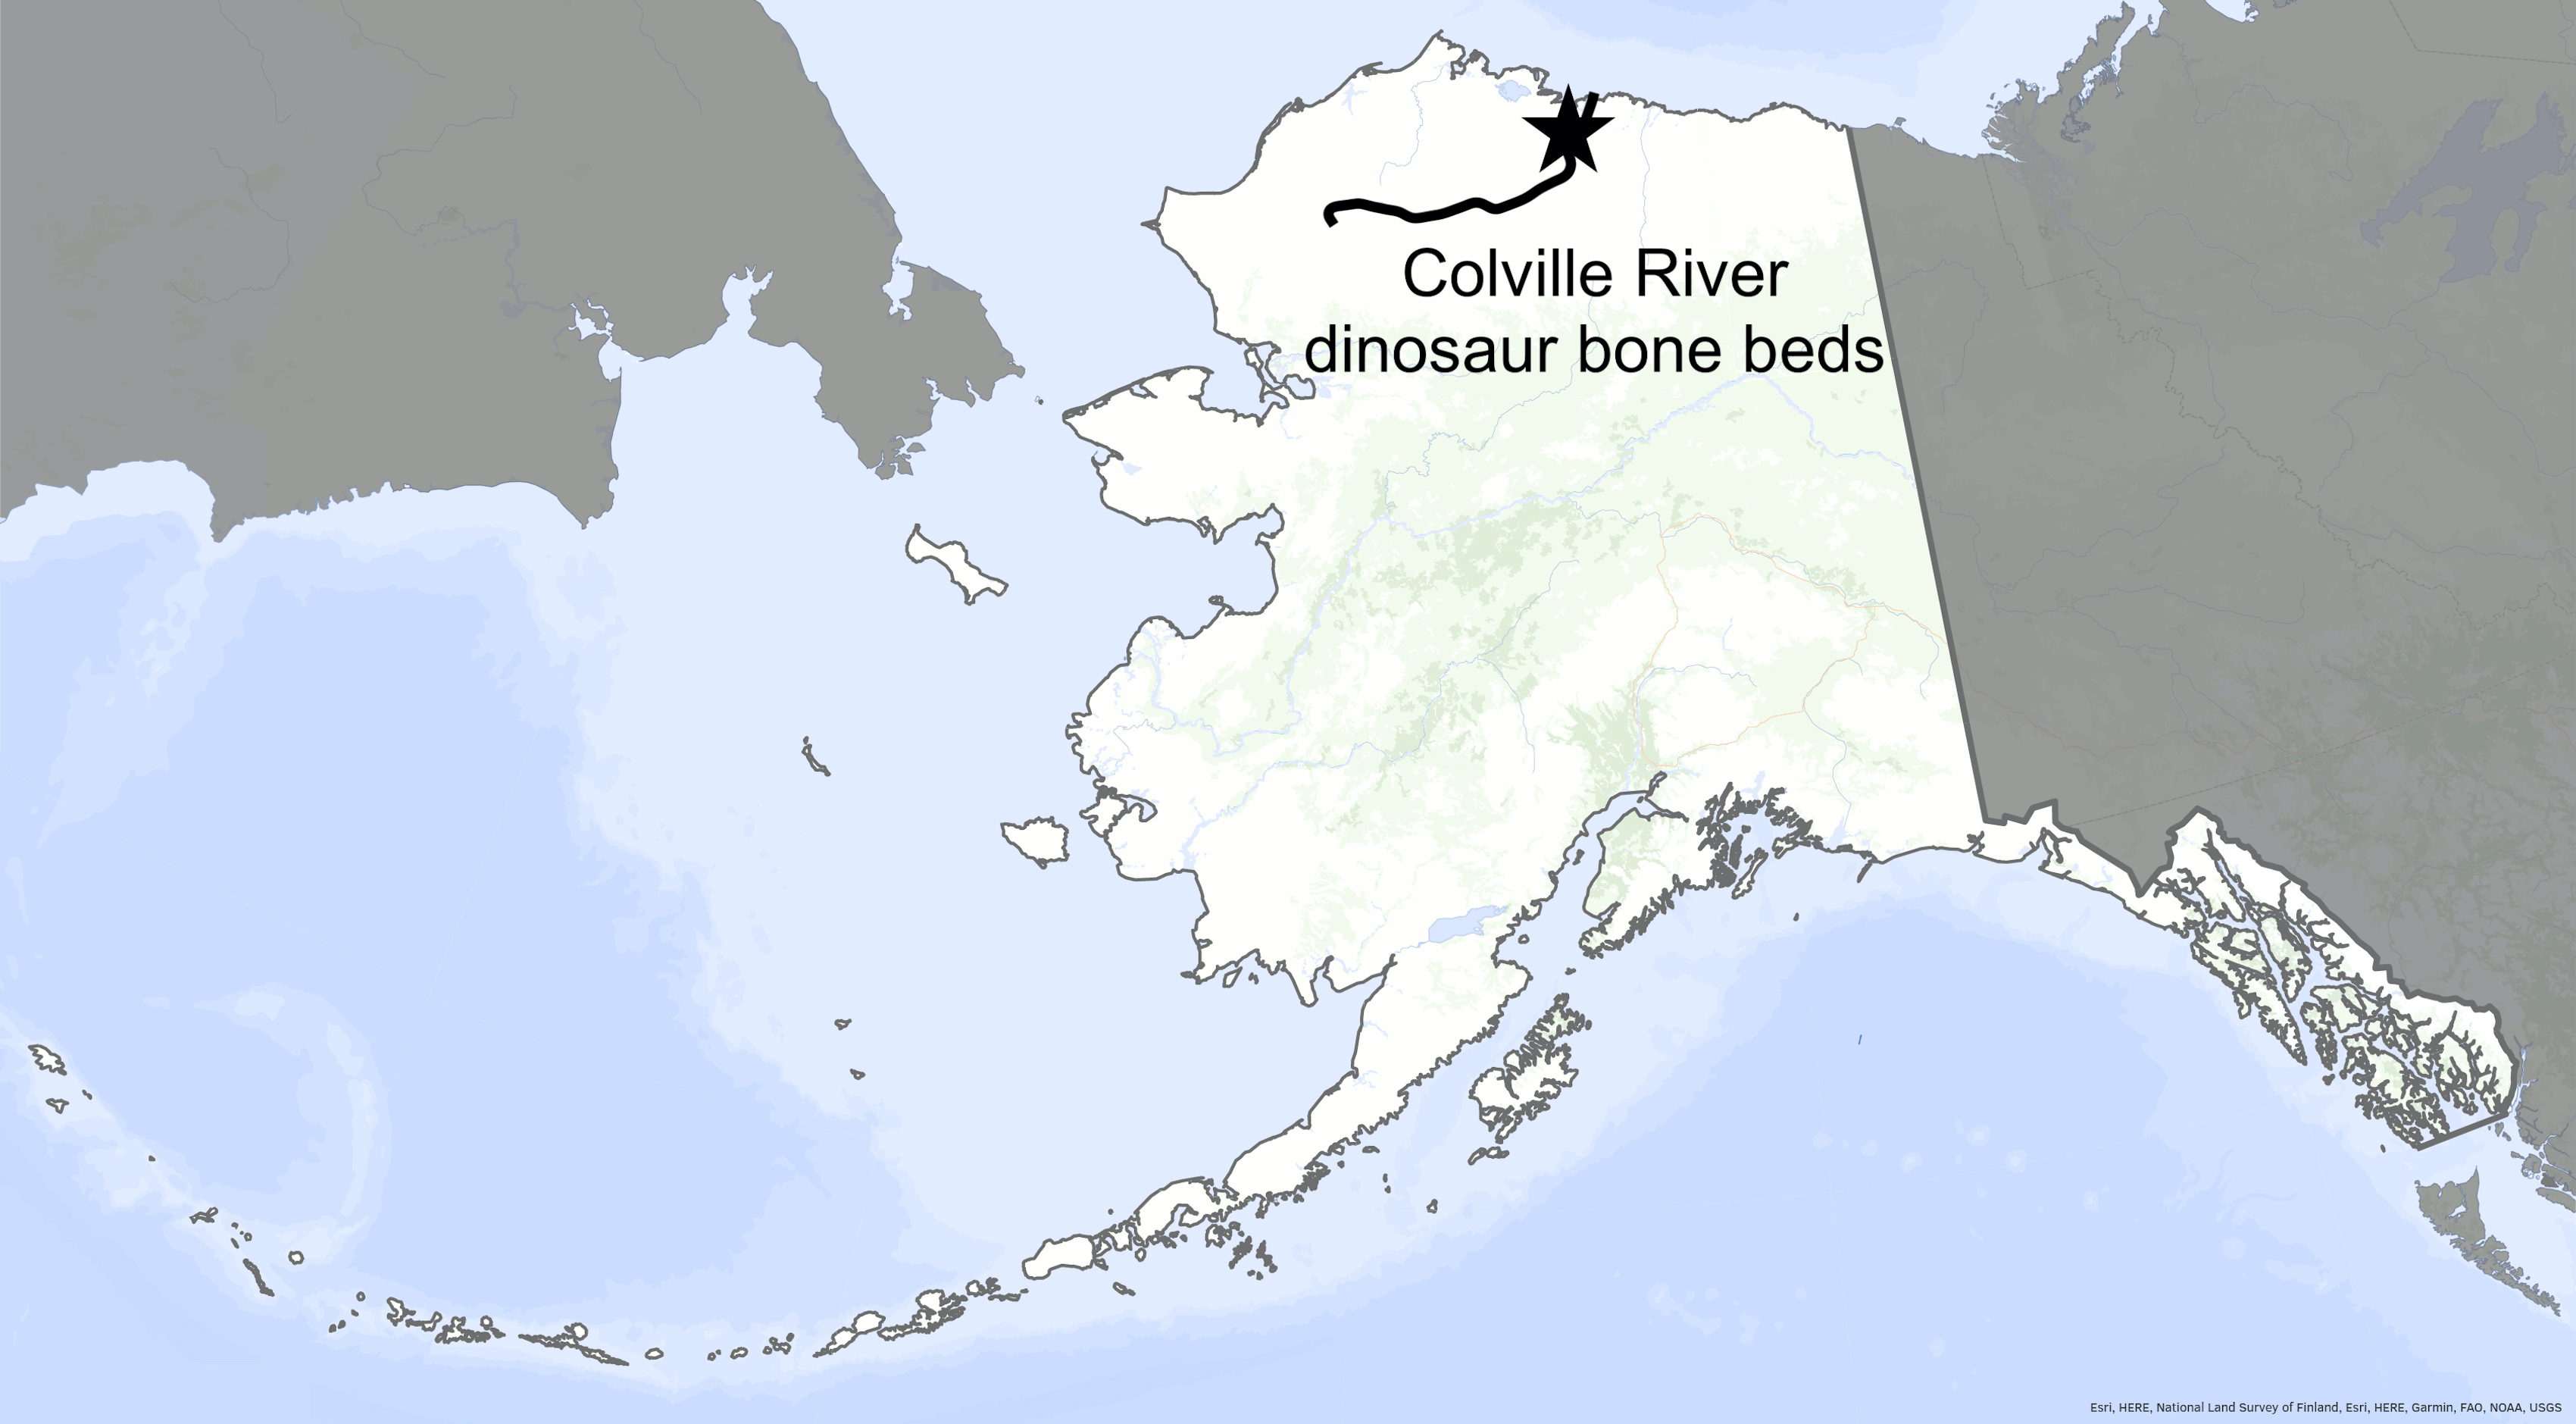 A map locates the dinosaur bone beds along the Colville River in northern Alaska.